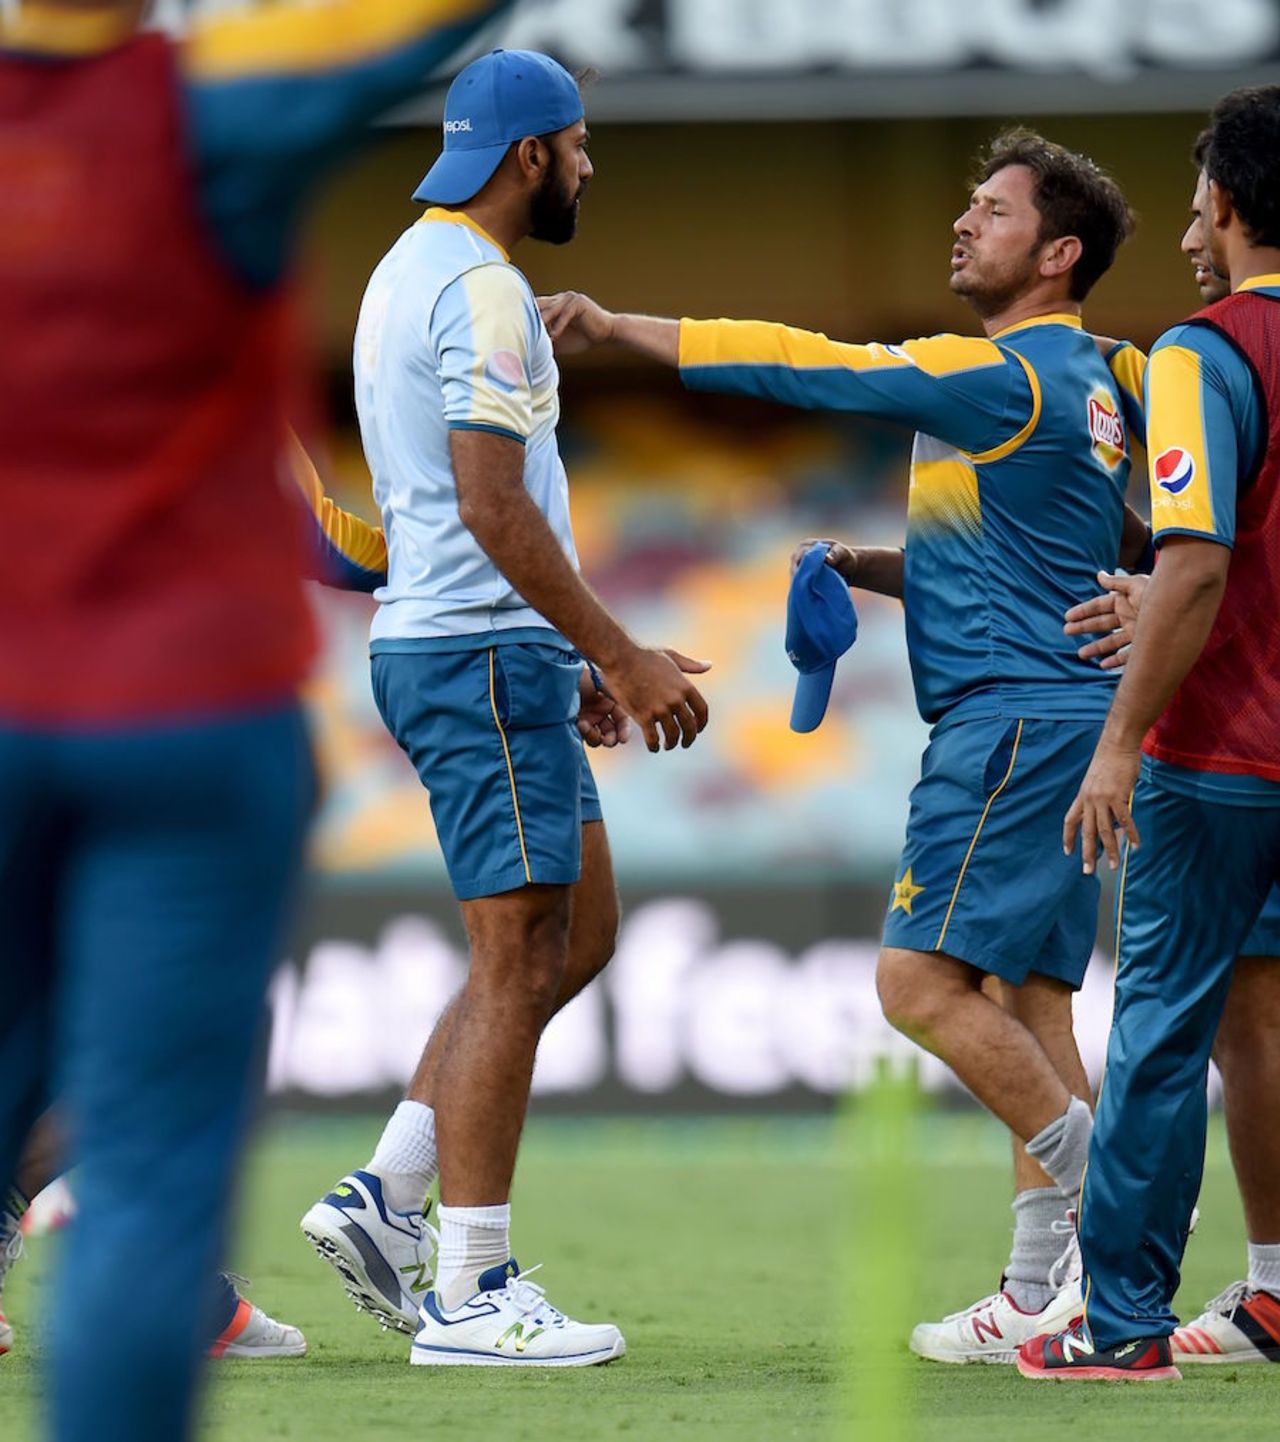 Wahab Riaz and Yasir Shah were involved in an altercation a day before the Test, Brisbane, December 14, 2016